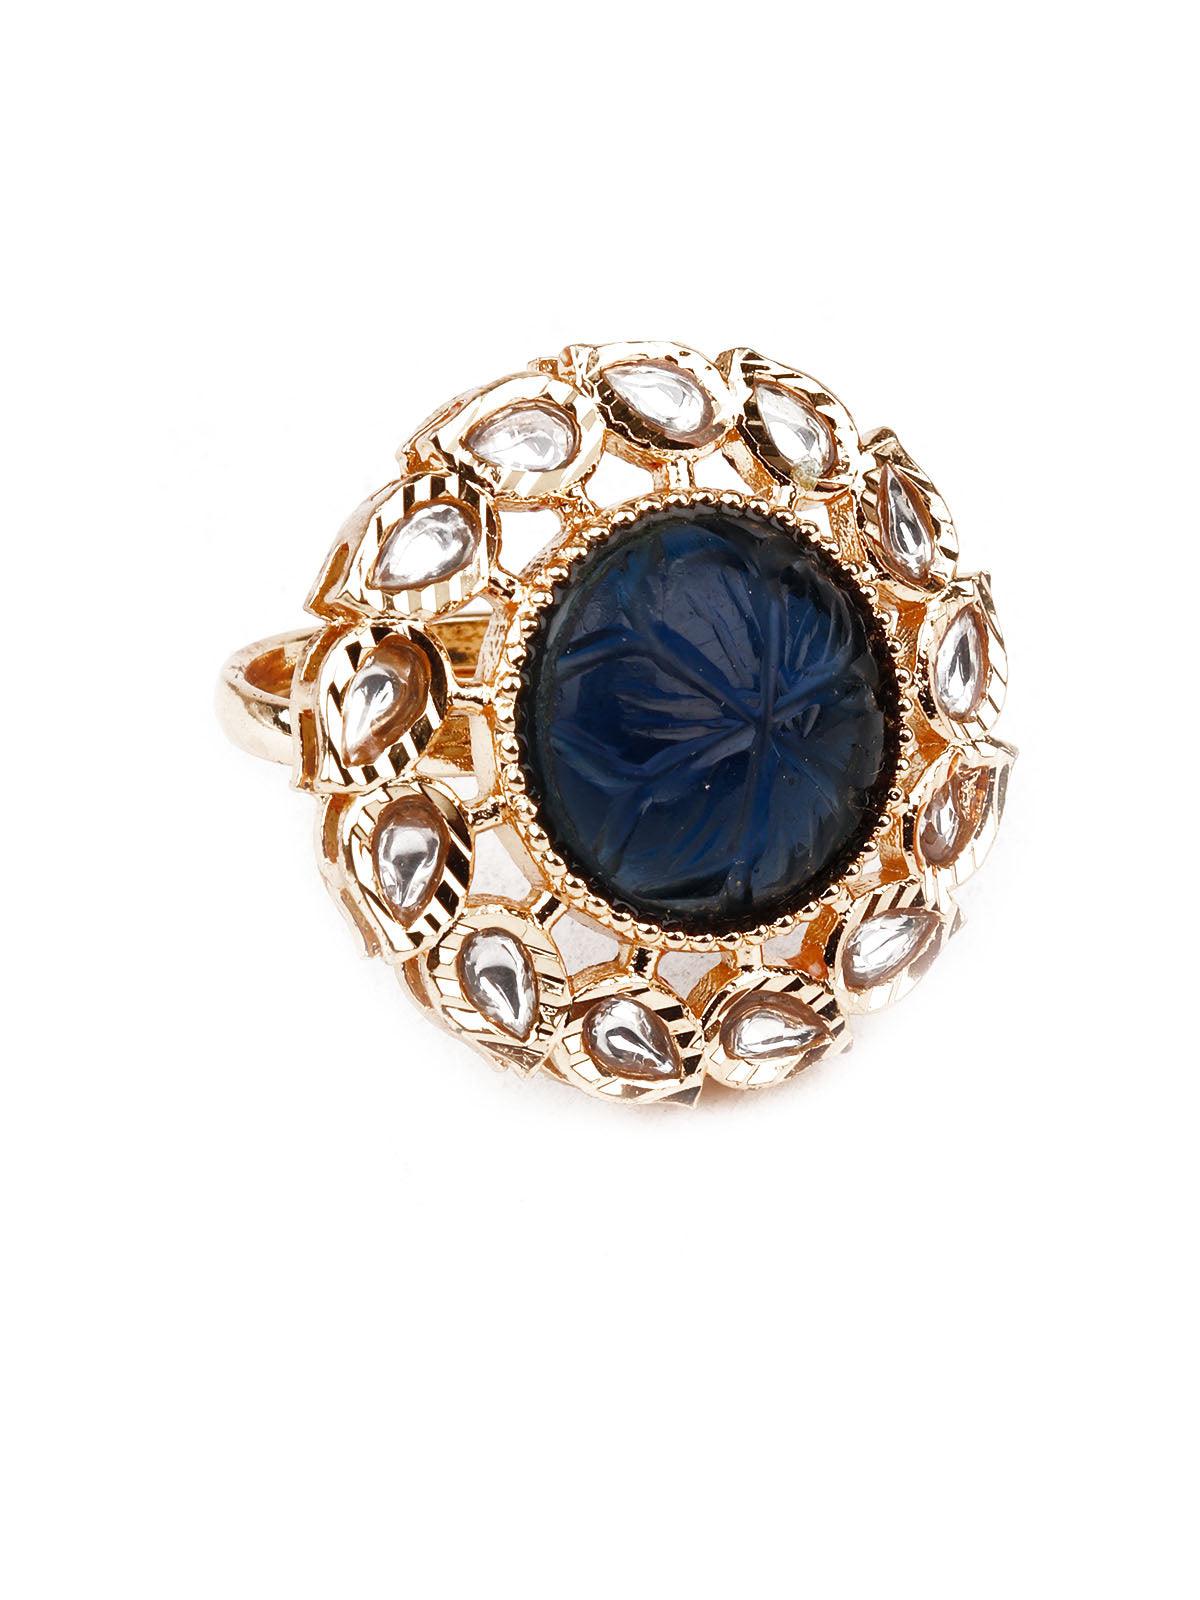 BLACK AND GOLD STYLISH RING - Odette